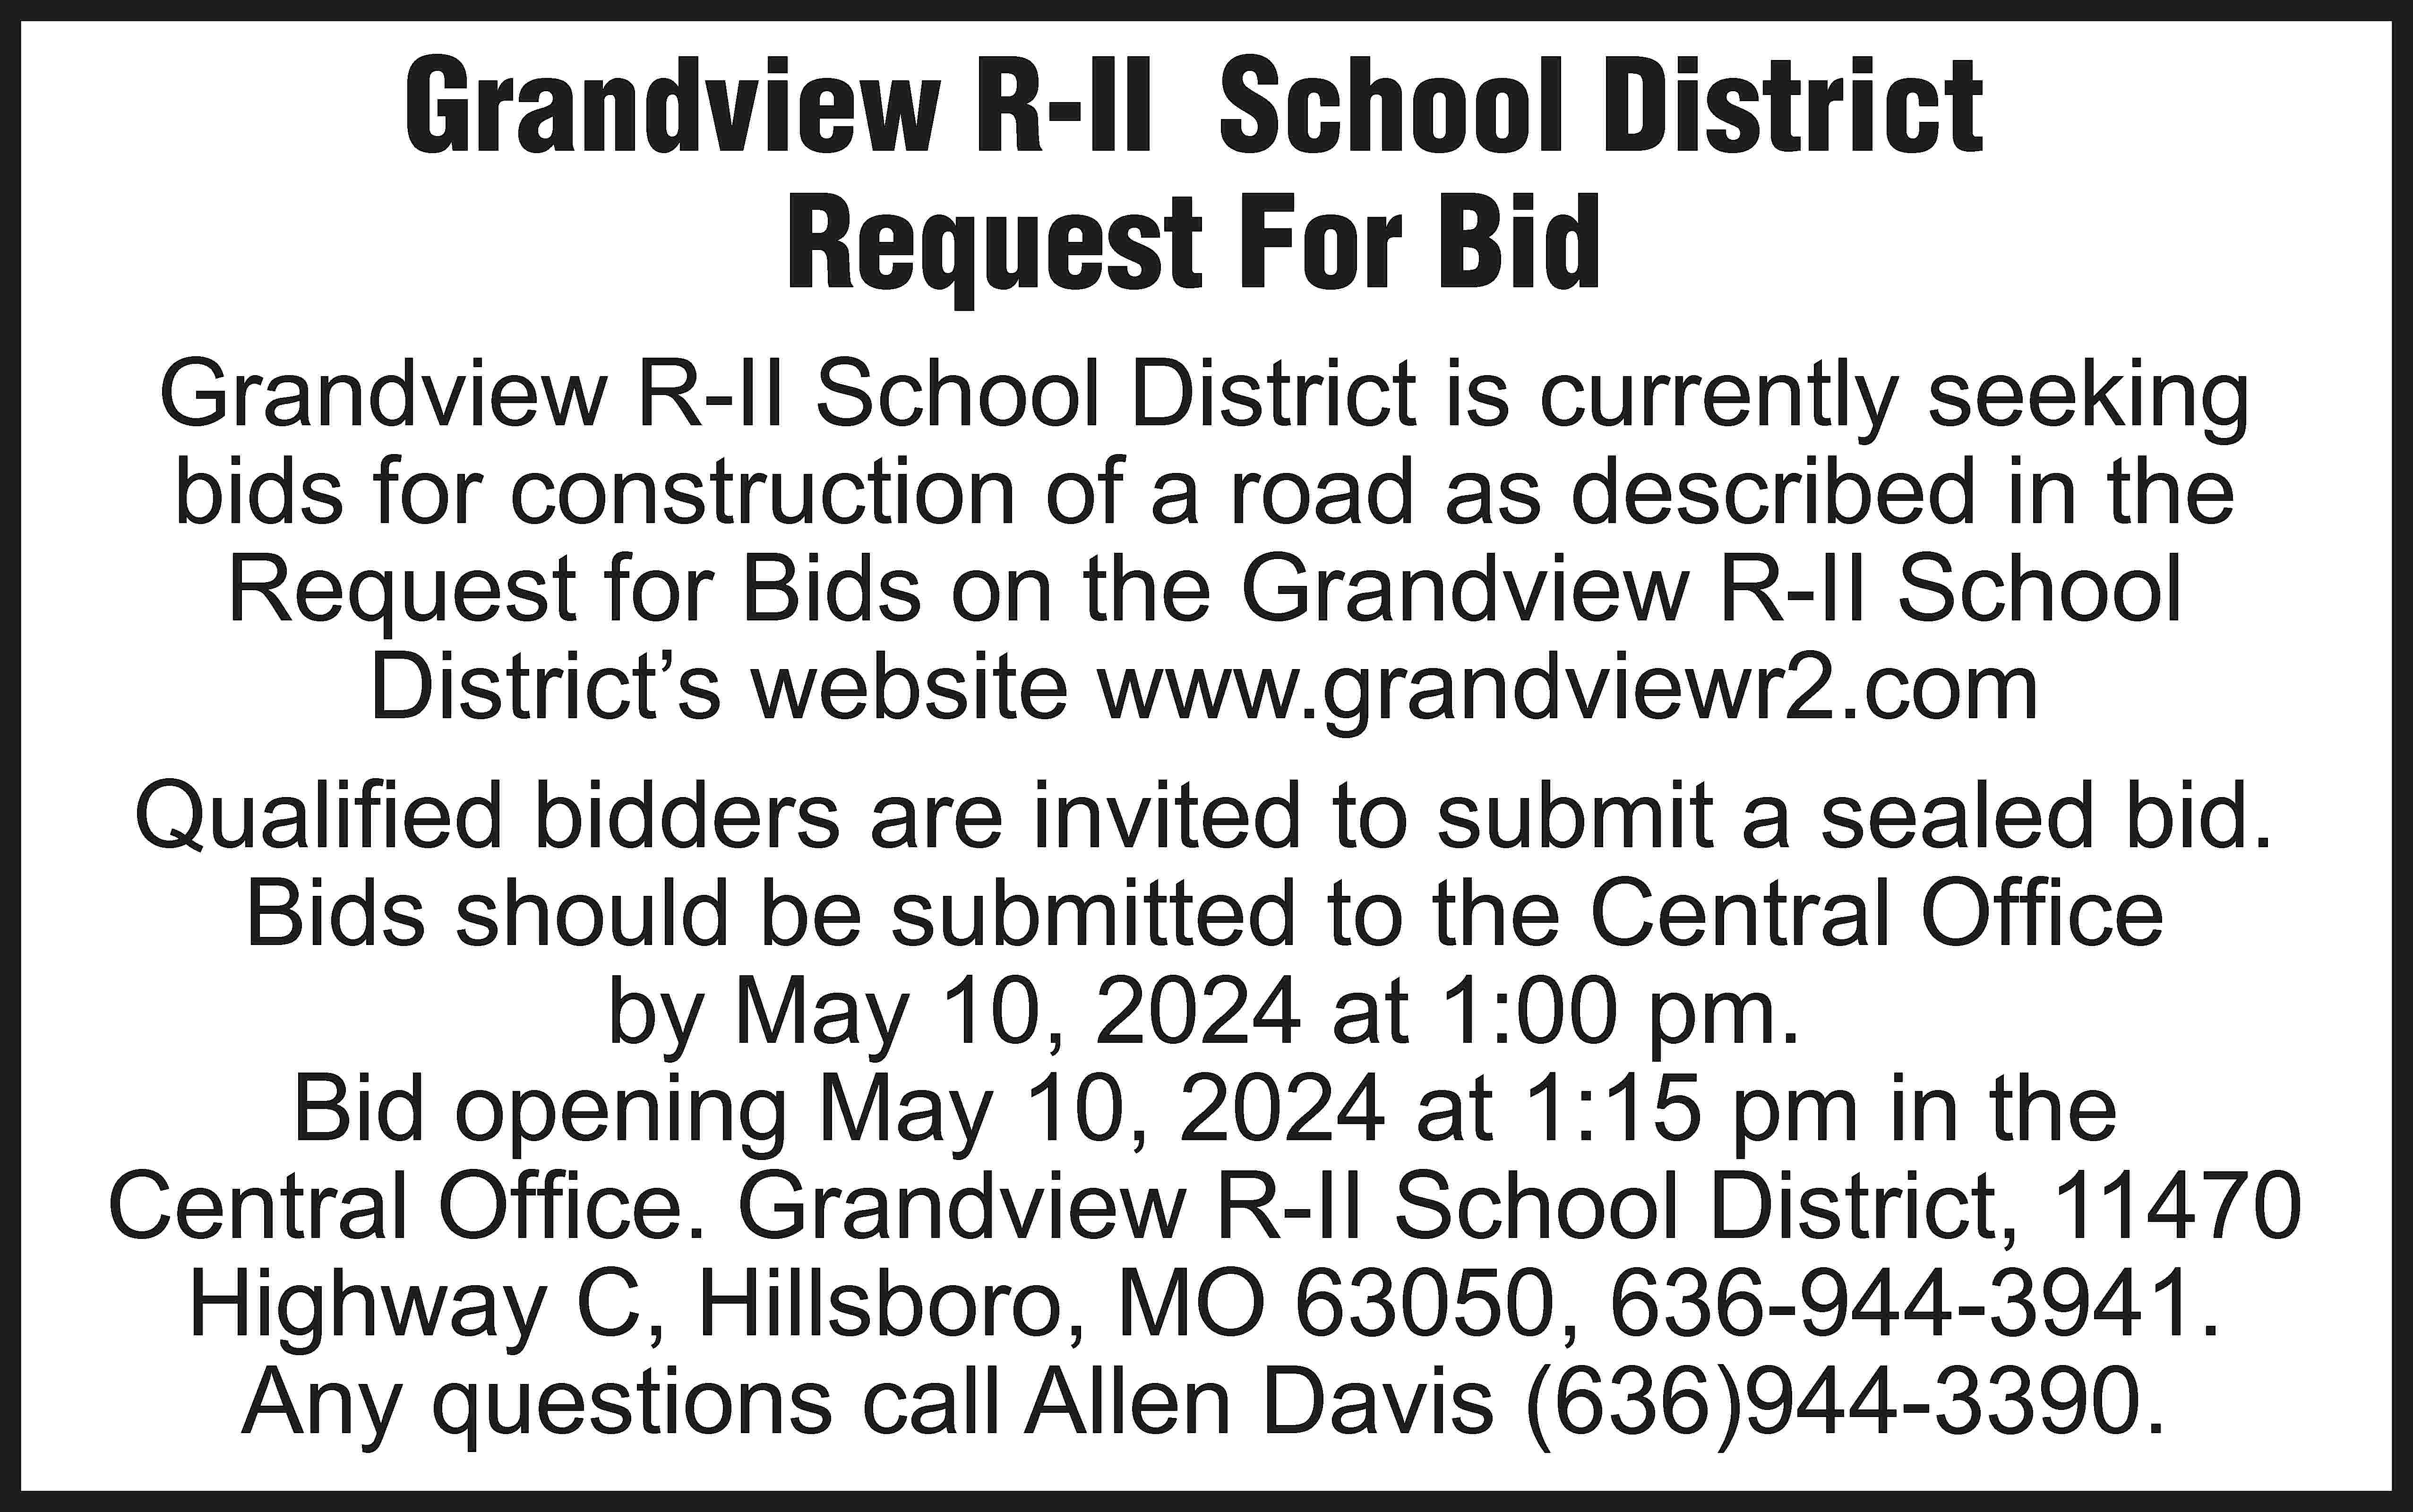 Grandview R-II School District Request  Grandview R-II School District Request For Bid Grandview R-II School District is currently seeking bids for construction of a road as described in the Request for Bids on the Grandview R-II School District’s website www.grandviewr2.com Qualified bidders are invited to submit a sealed bid. Bids should be submitted to the Central Office by May 10, 2024 at 1:00 pm. Bid opening May 10, 2024 at 1:15 pm in the Central Office. Grandview R-II School District, 11470 Highway C, Hillsboro, MO 63050, 636-944-3941. Any questions call Allen Davis (636)944-3390.